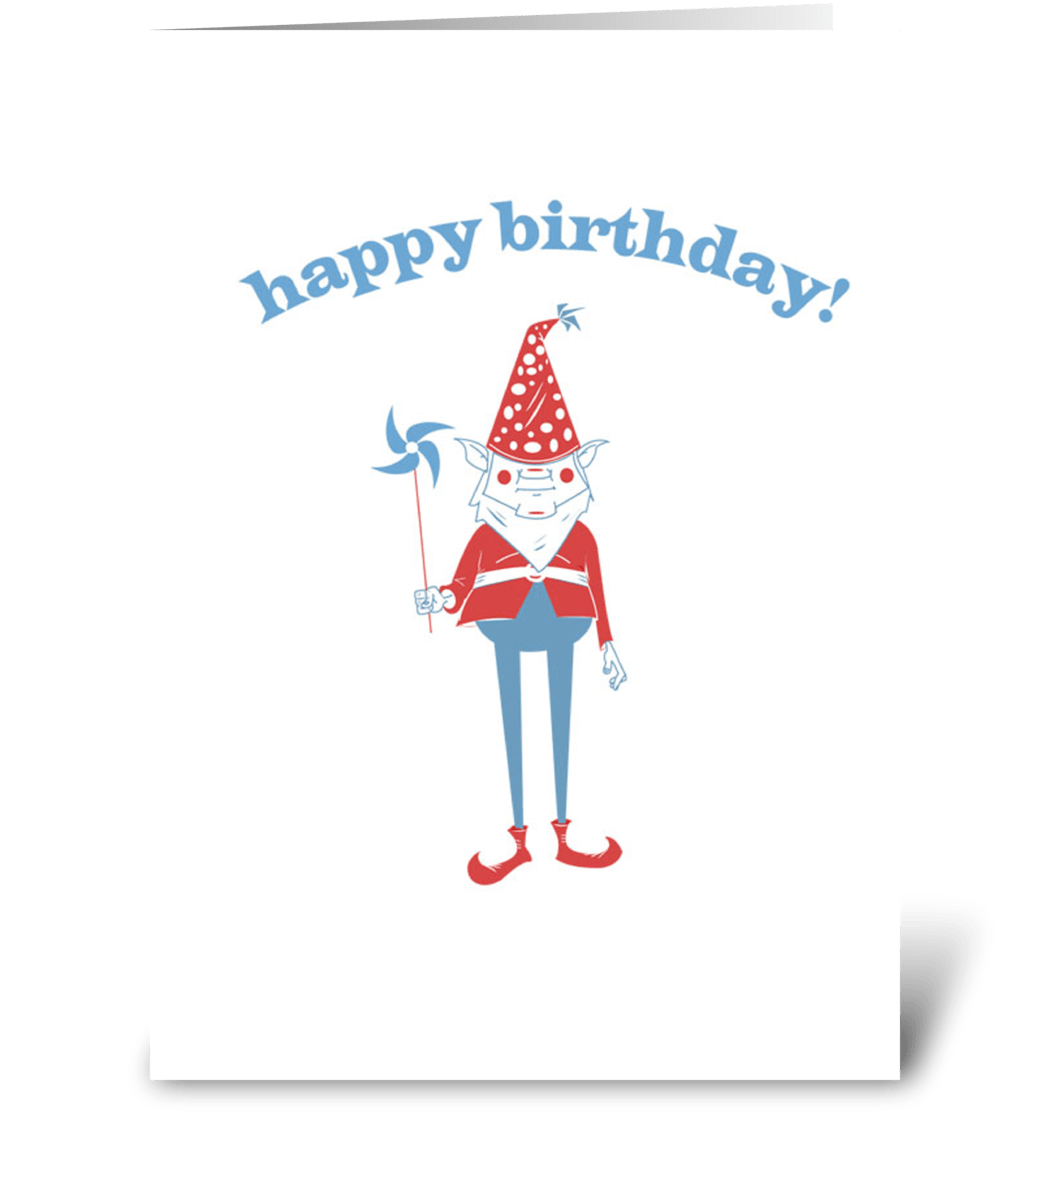 Birthday Gnome - Send this greeting card designed by Giant Gnome Design.